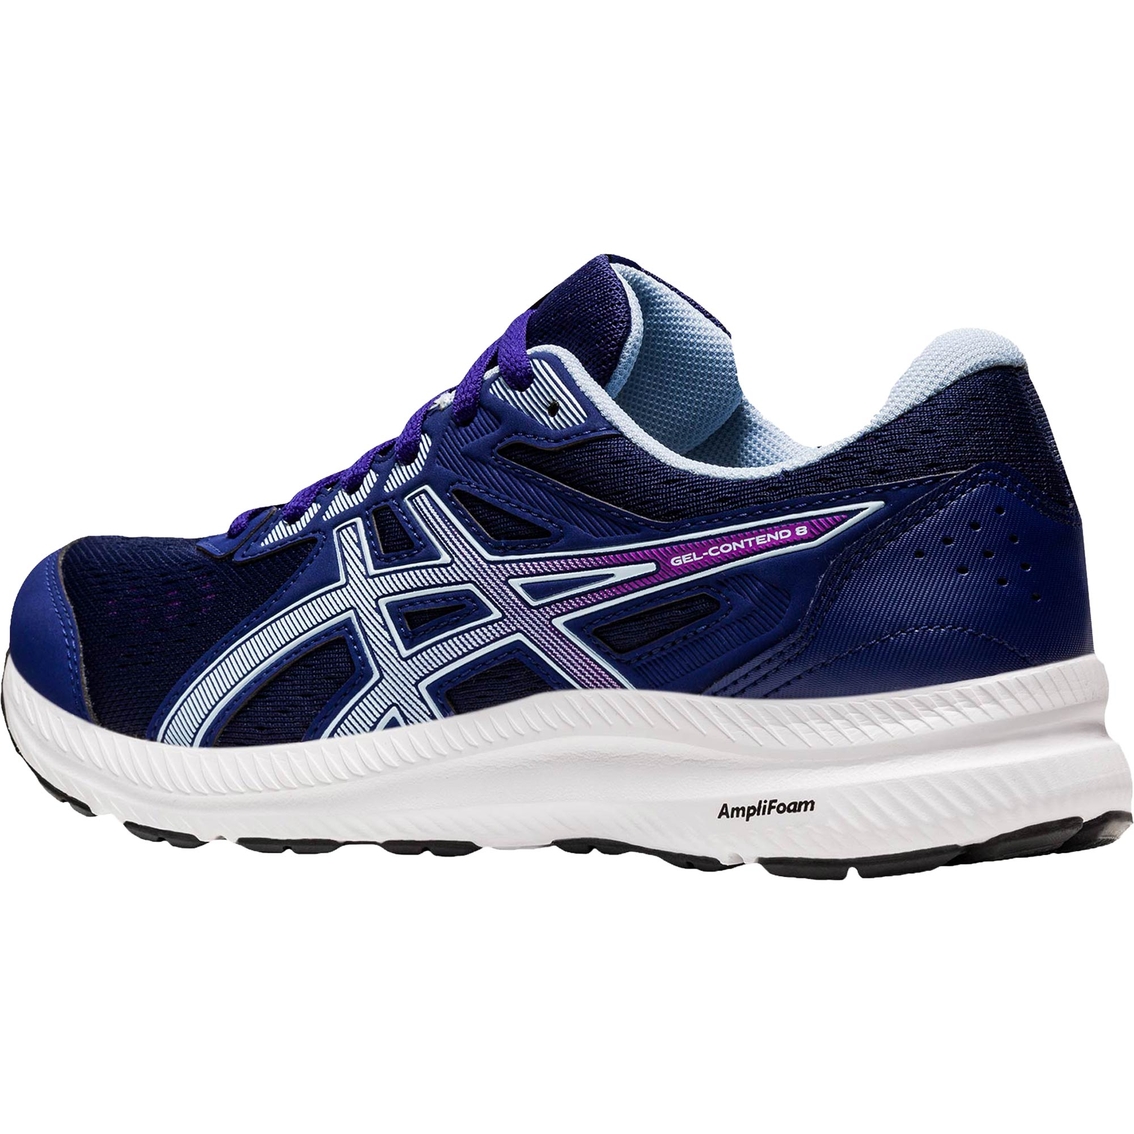 ASICS Women's GEL Contend 8 Running Shoes - Image 4 of 7